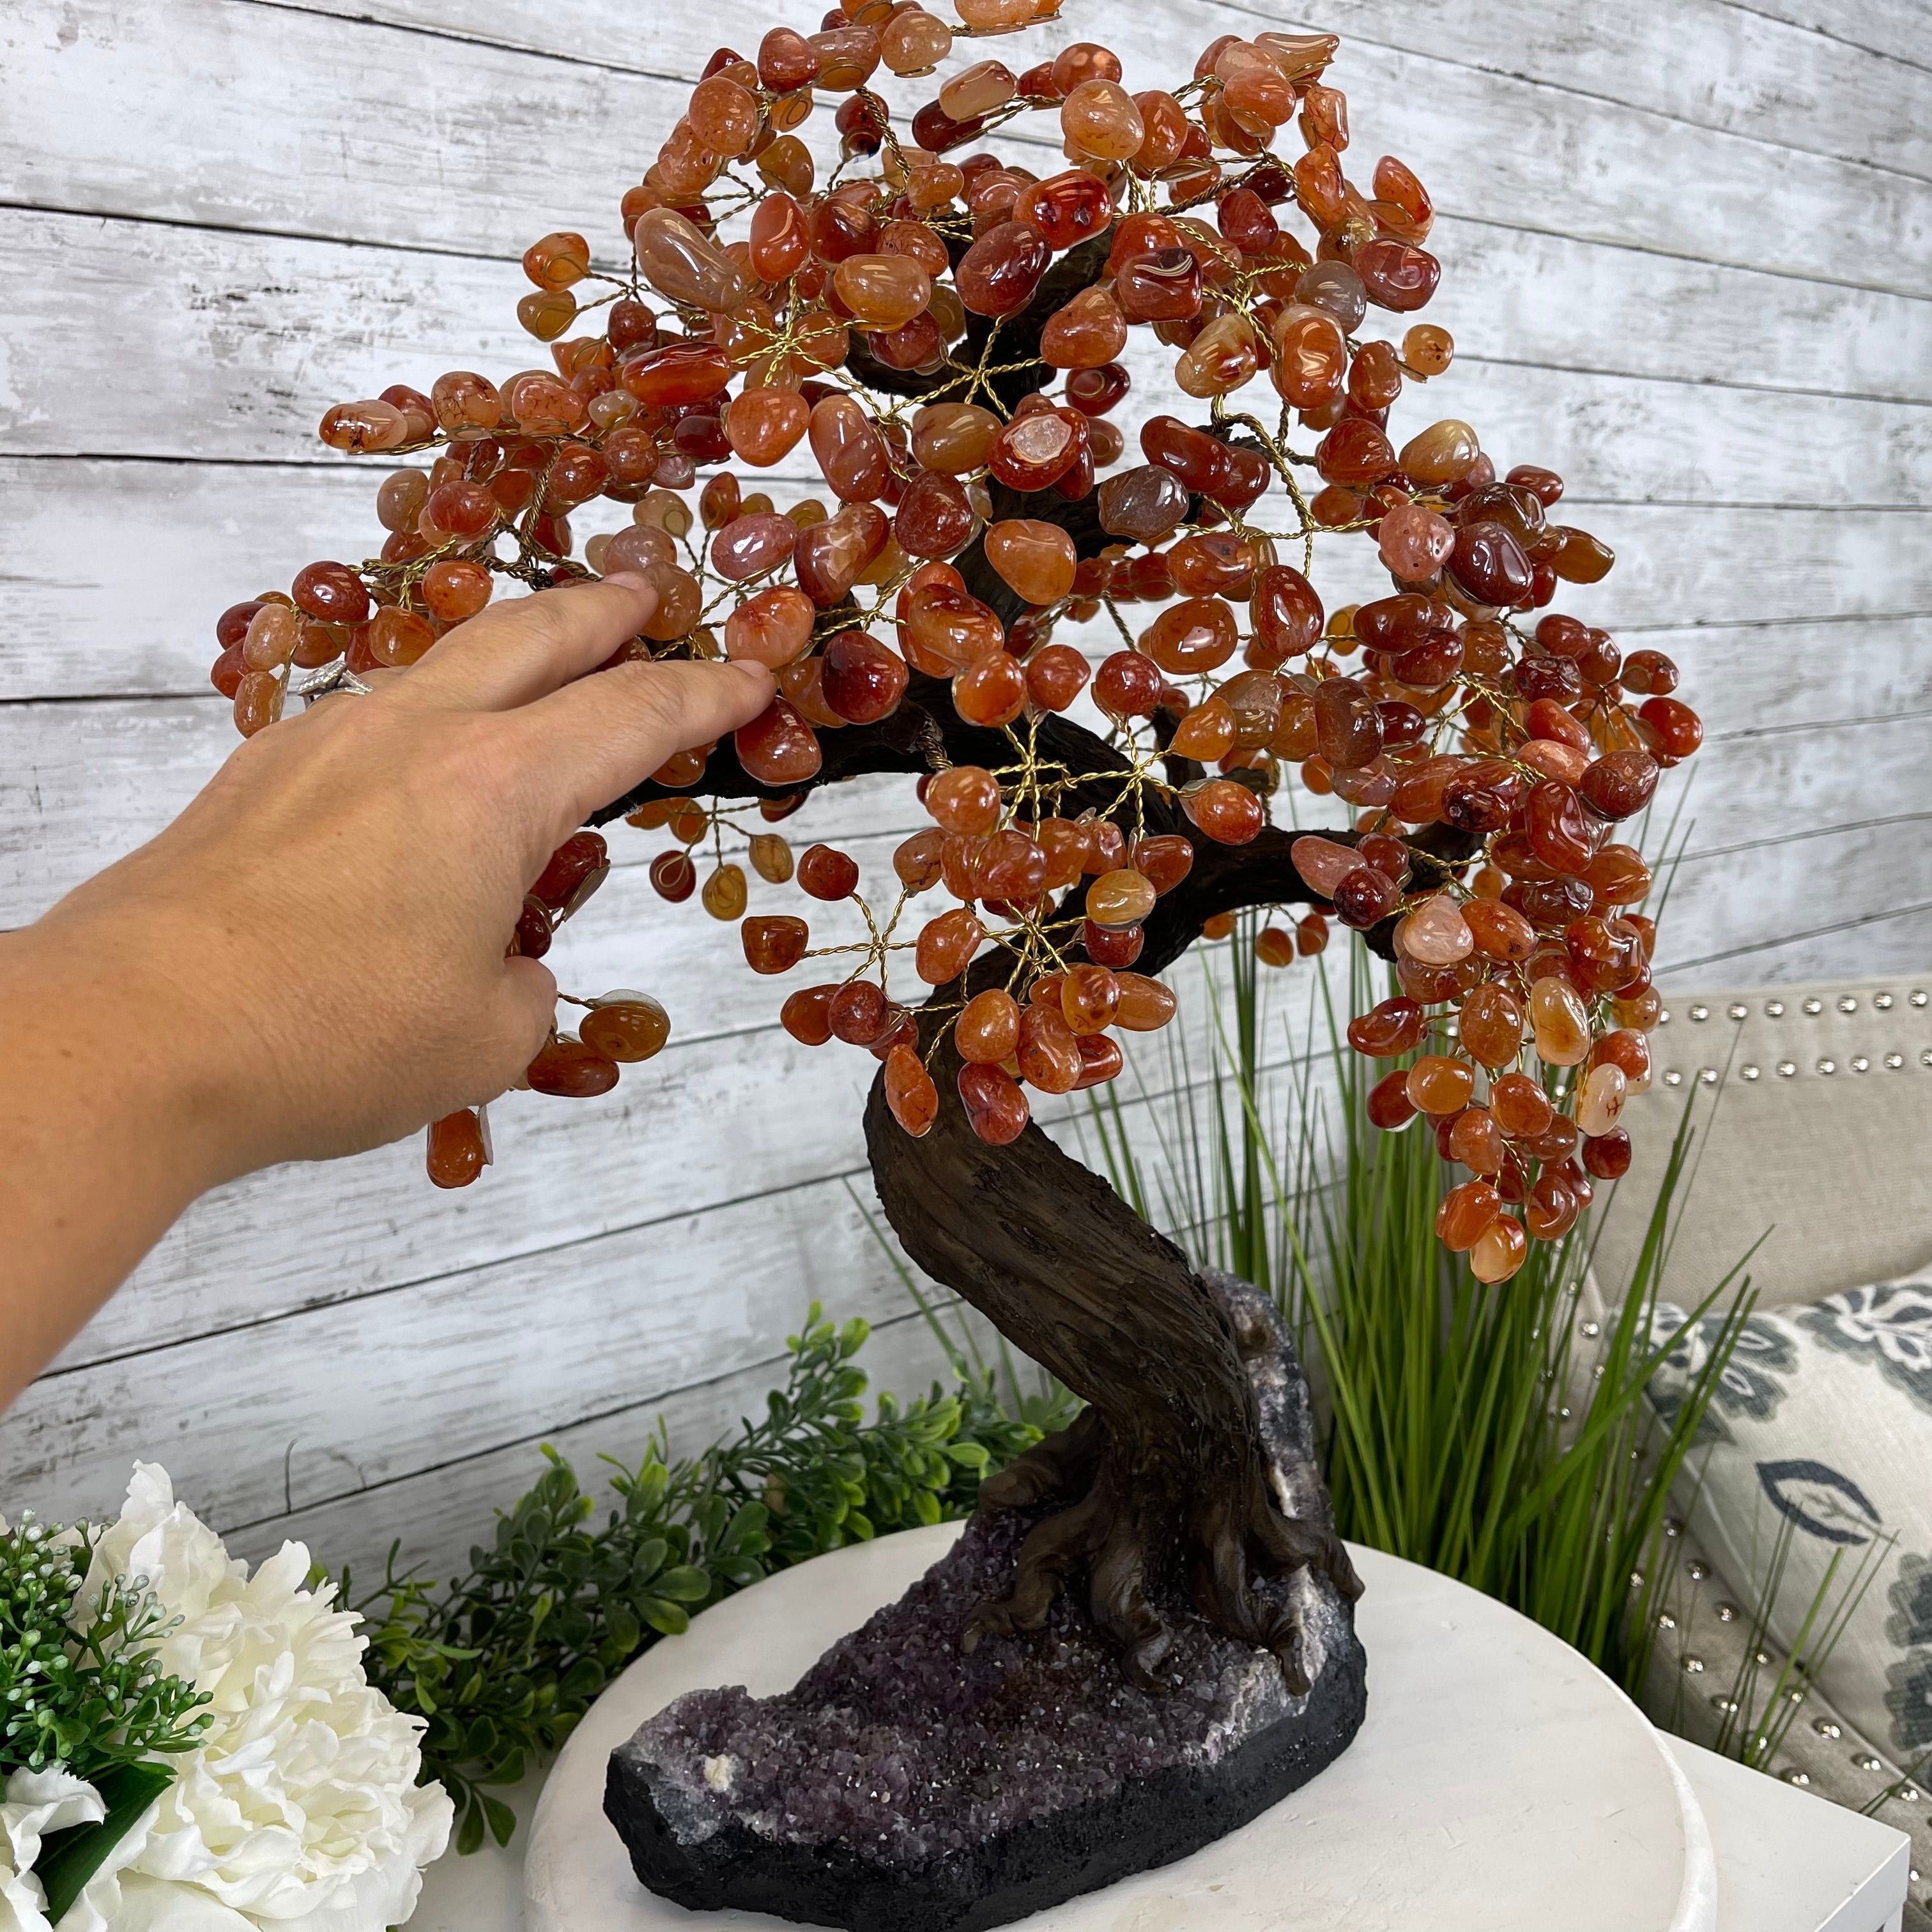 Hand touching the Carnelian Gemstone Tree with red gemstones